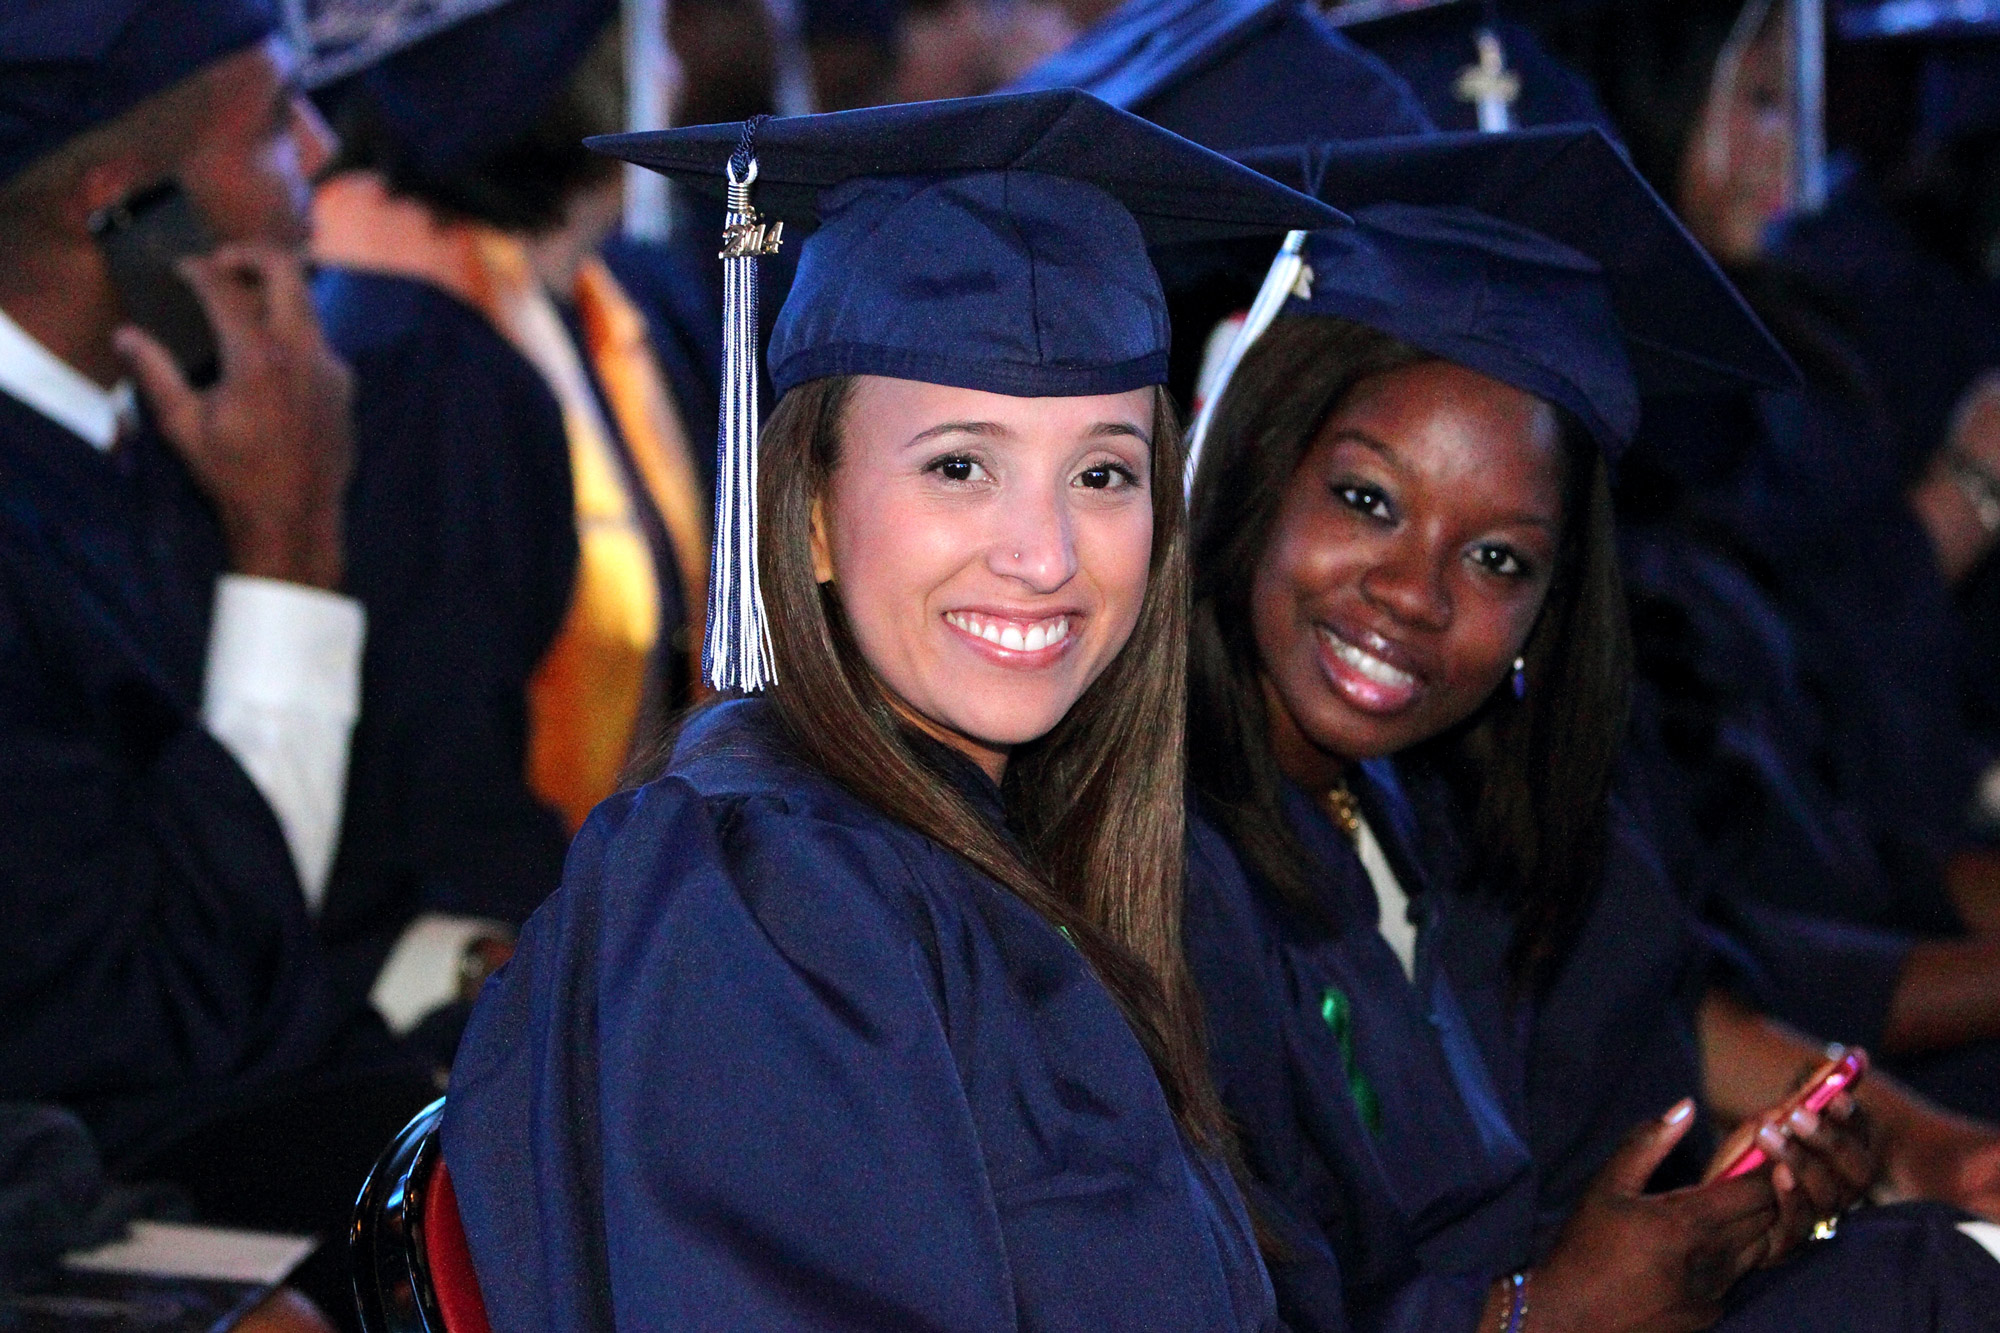 Students graduating from Broward College